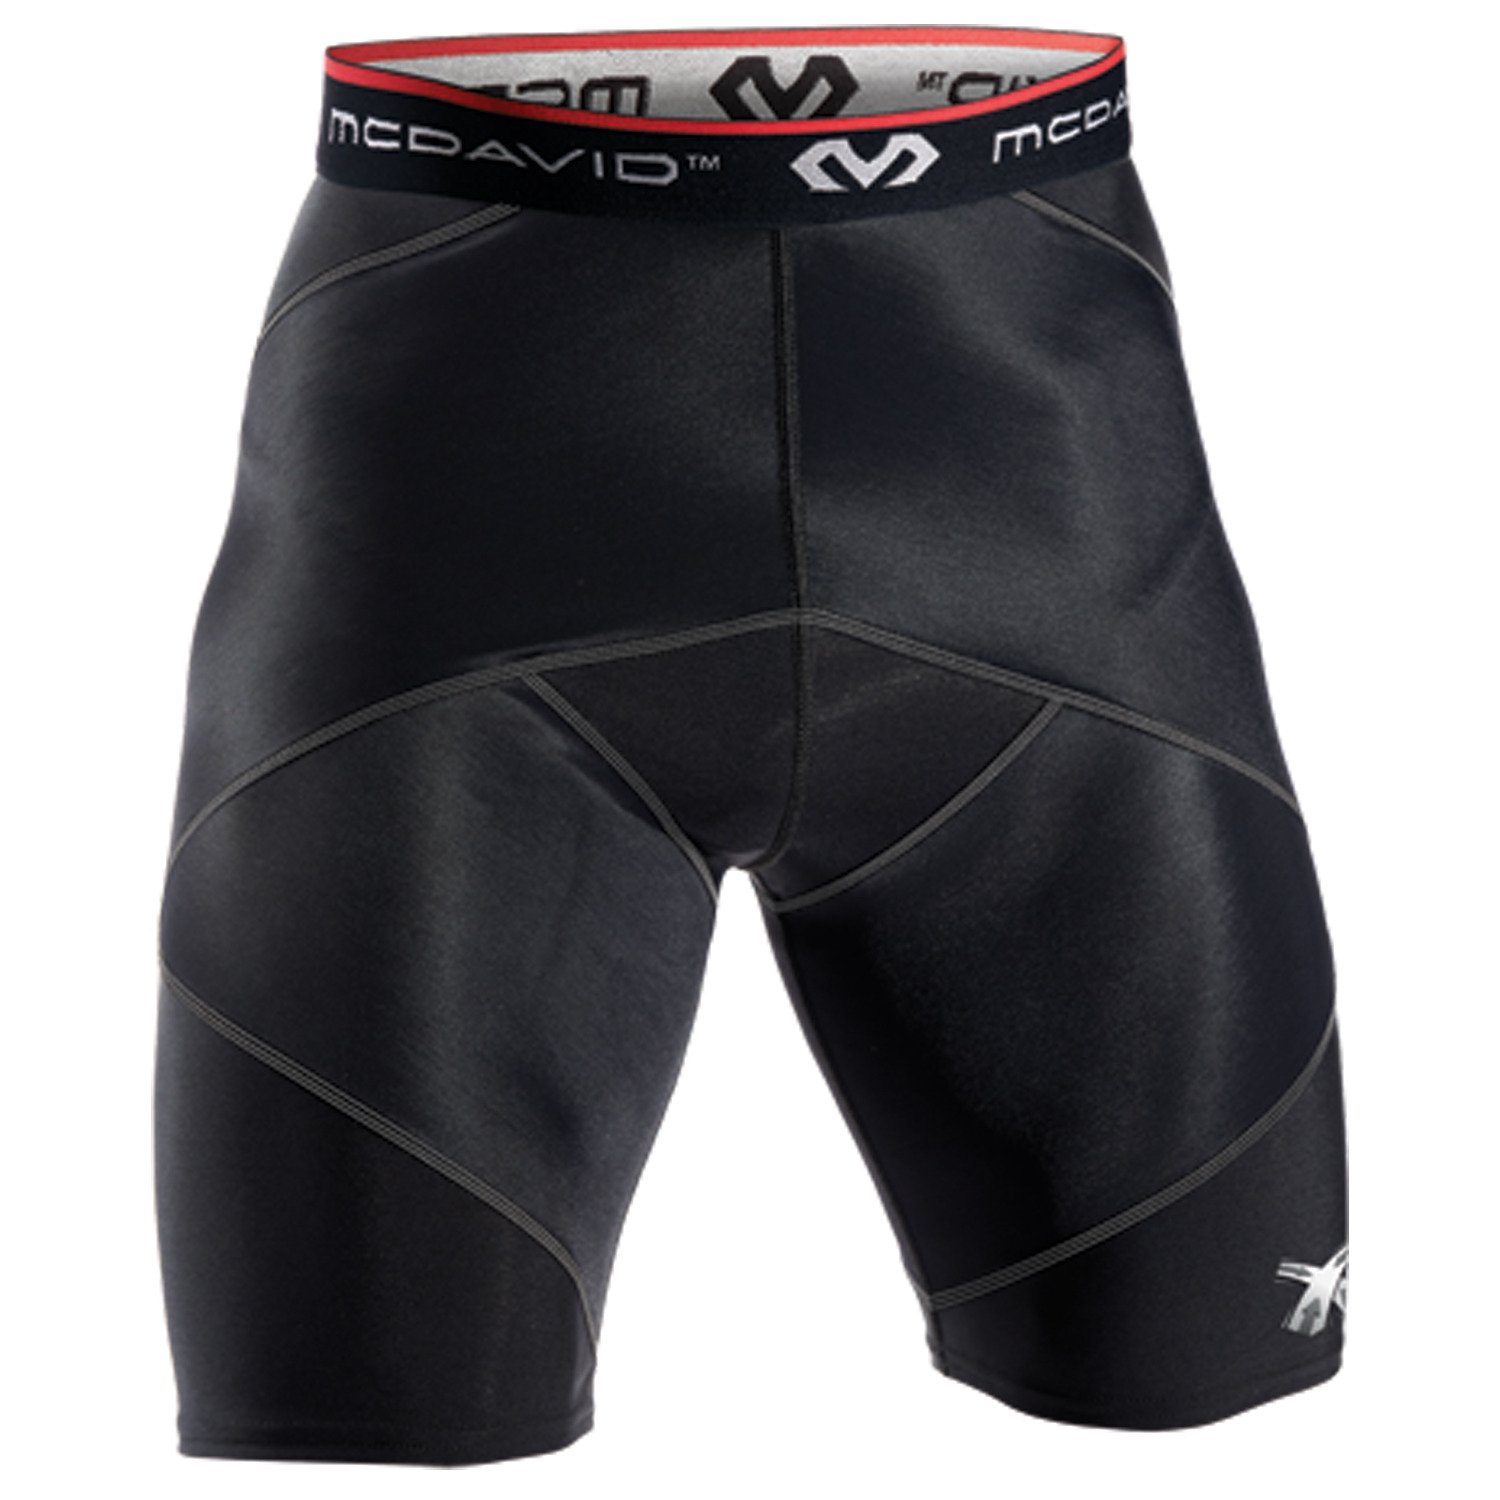 McDavid Cross Compression™ Short with Hip Spica | Academy